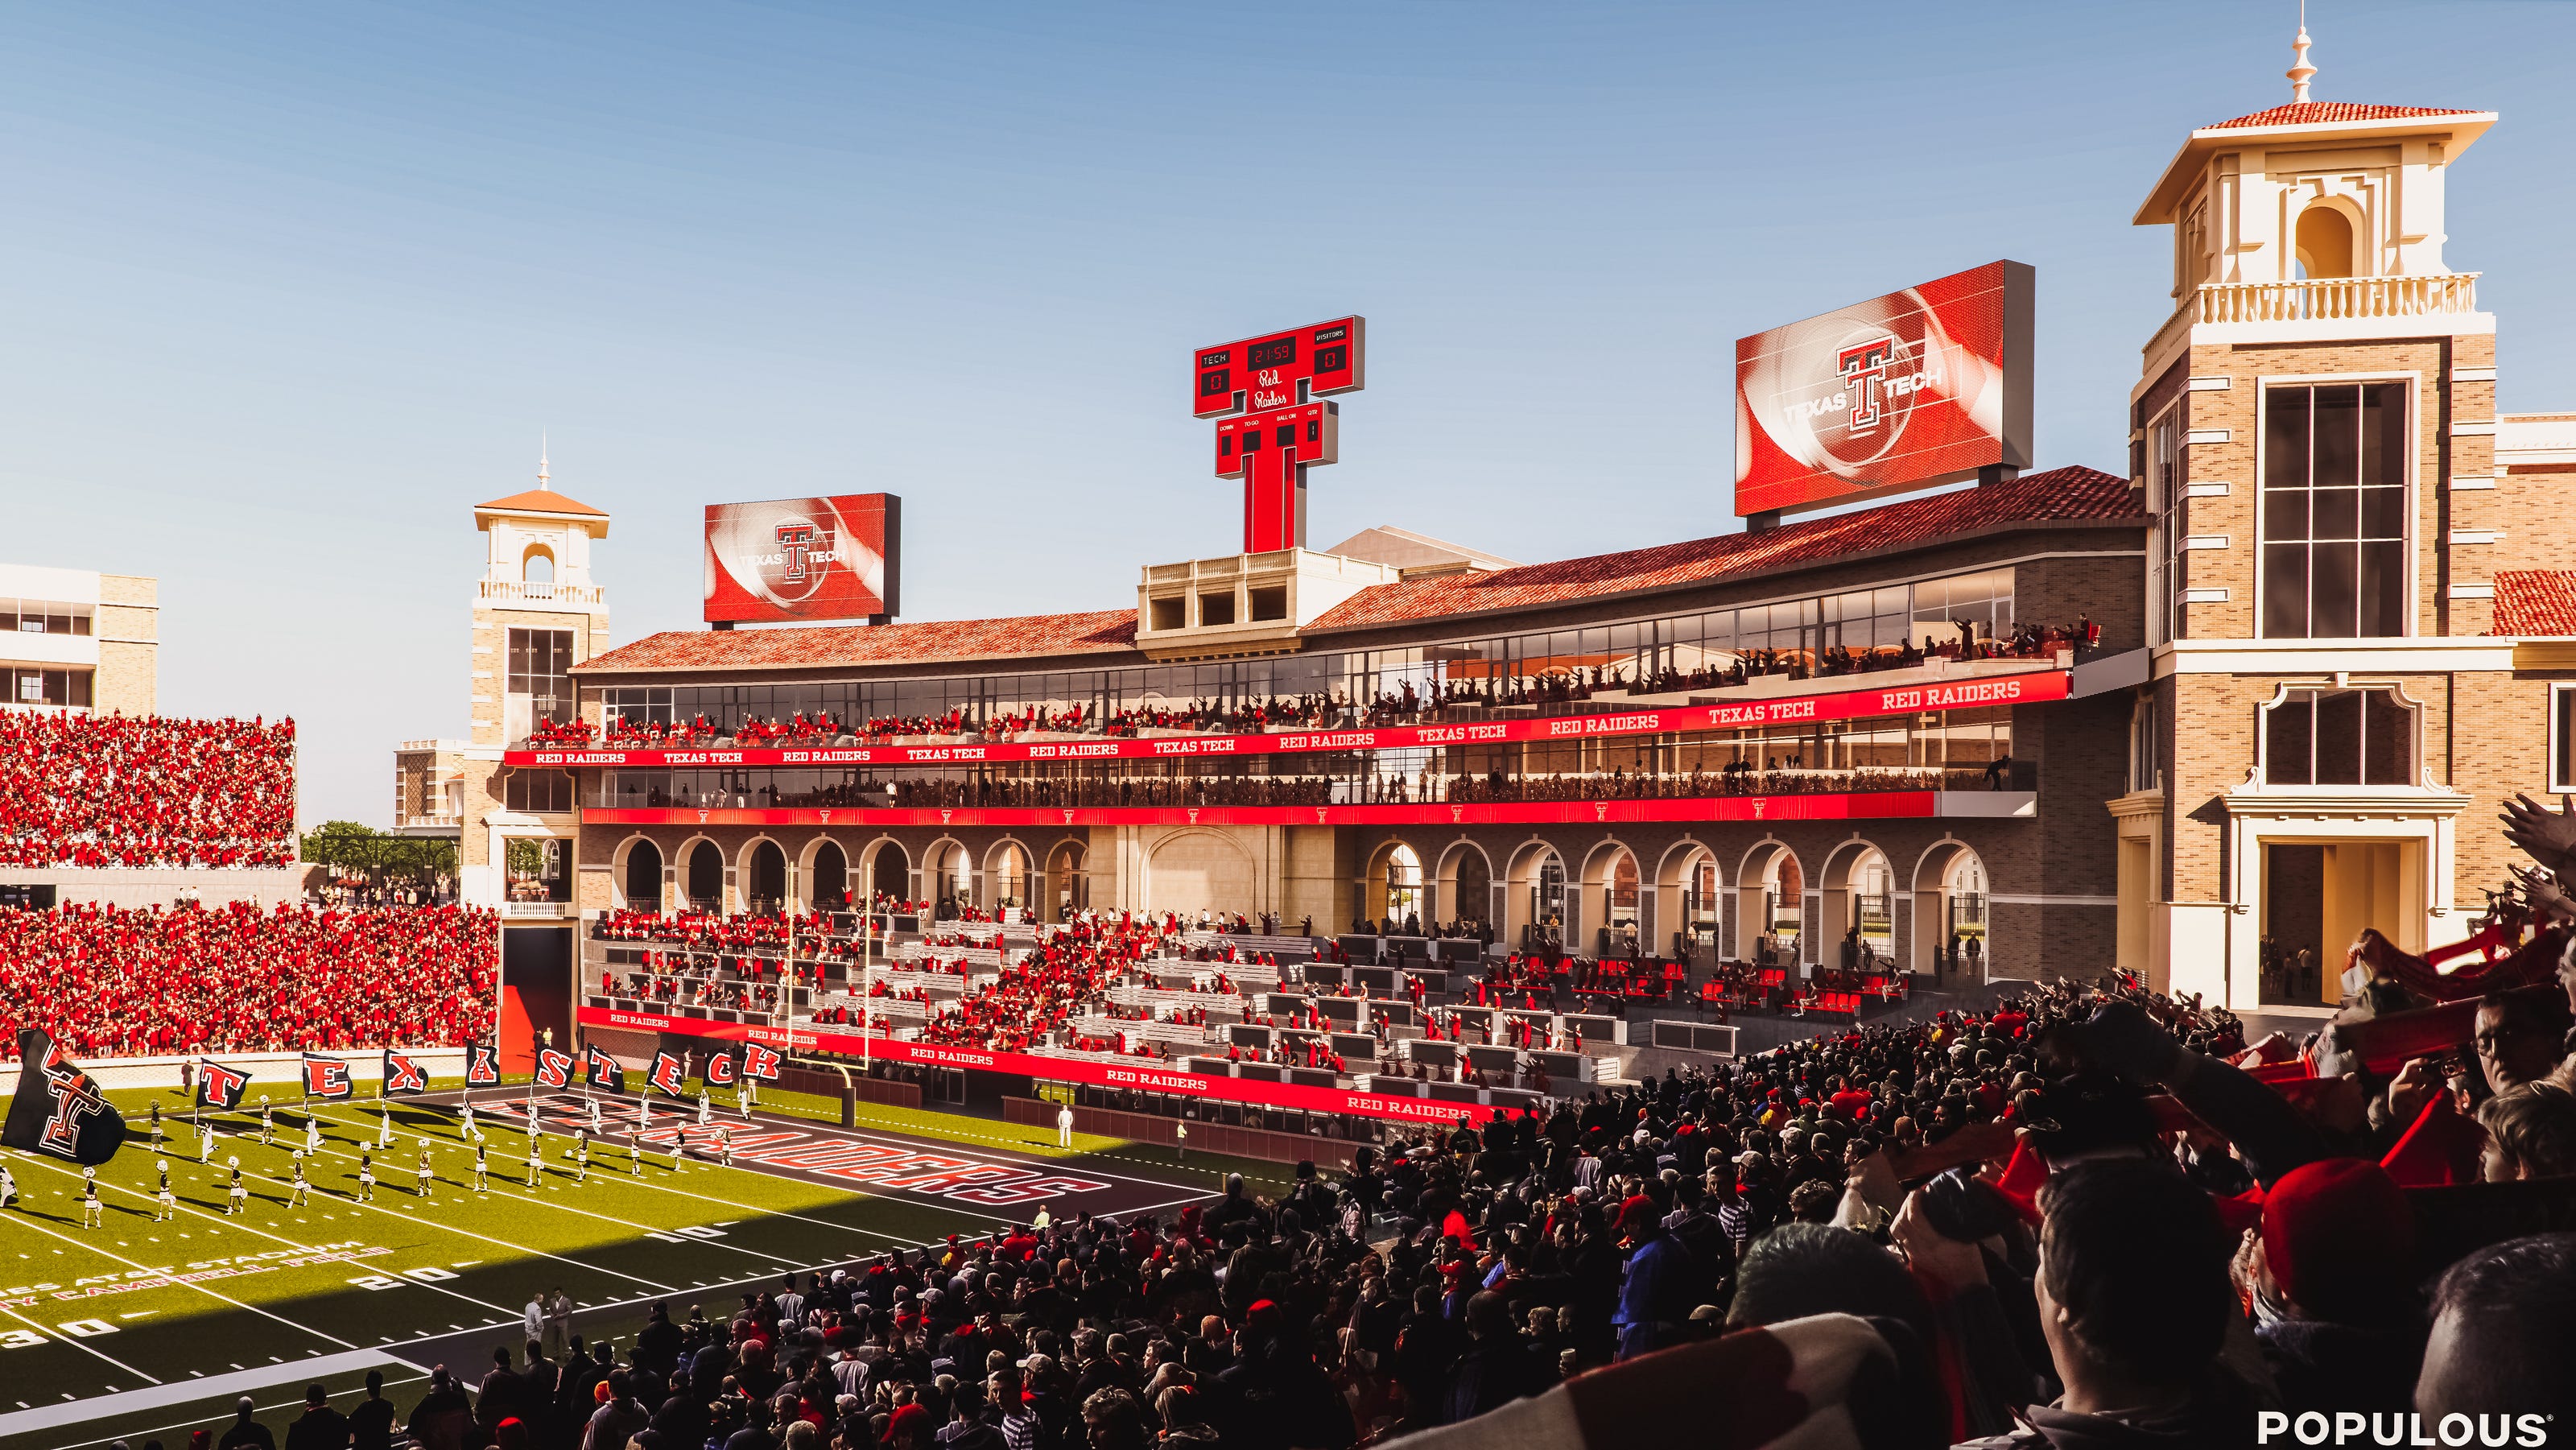 Former Texas Tech athletes named as sources of 11 million pledge